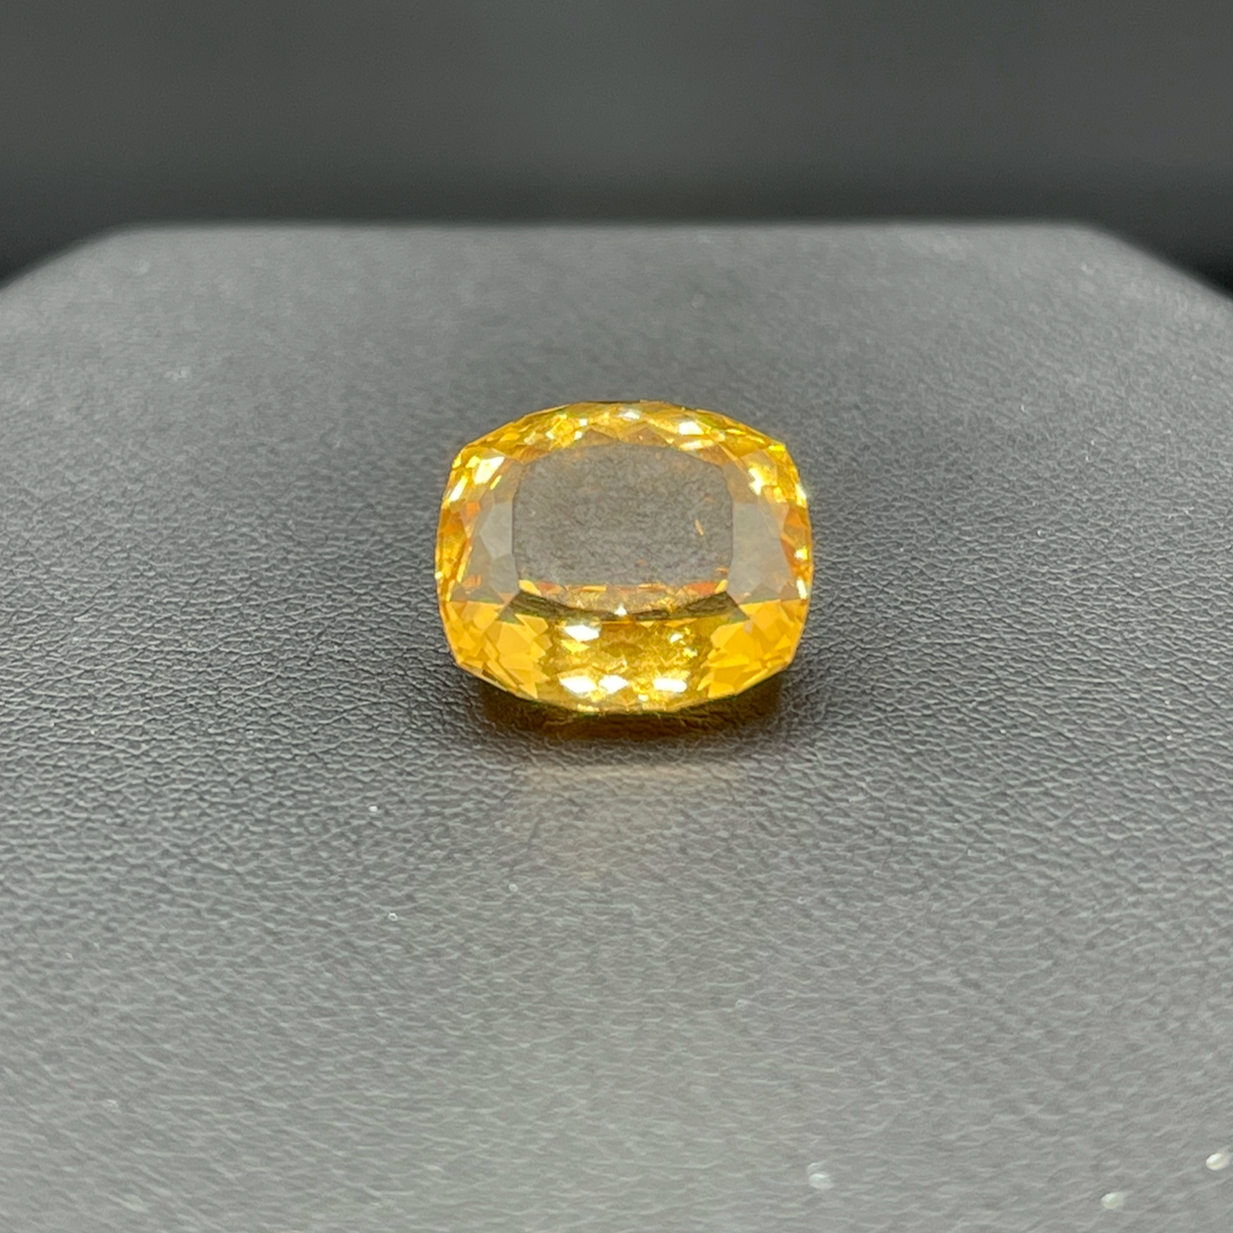 13.98 Carat Brazilian Flawless Natural Untreated Imperial Topaz